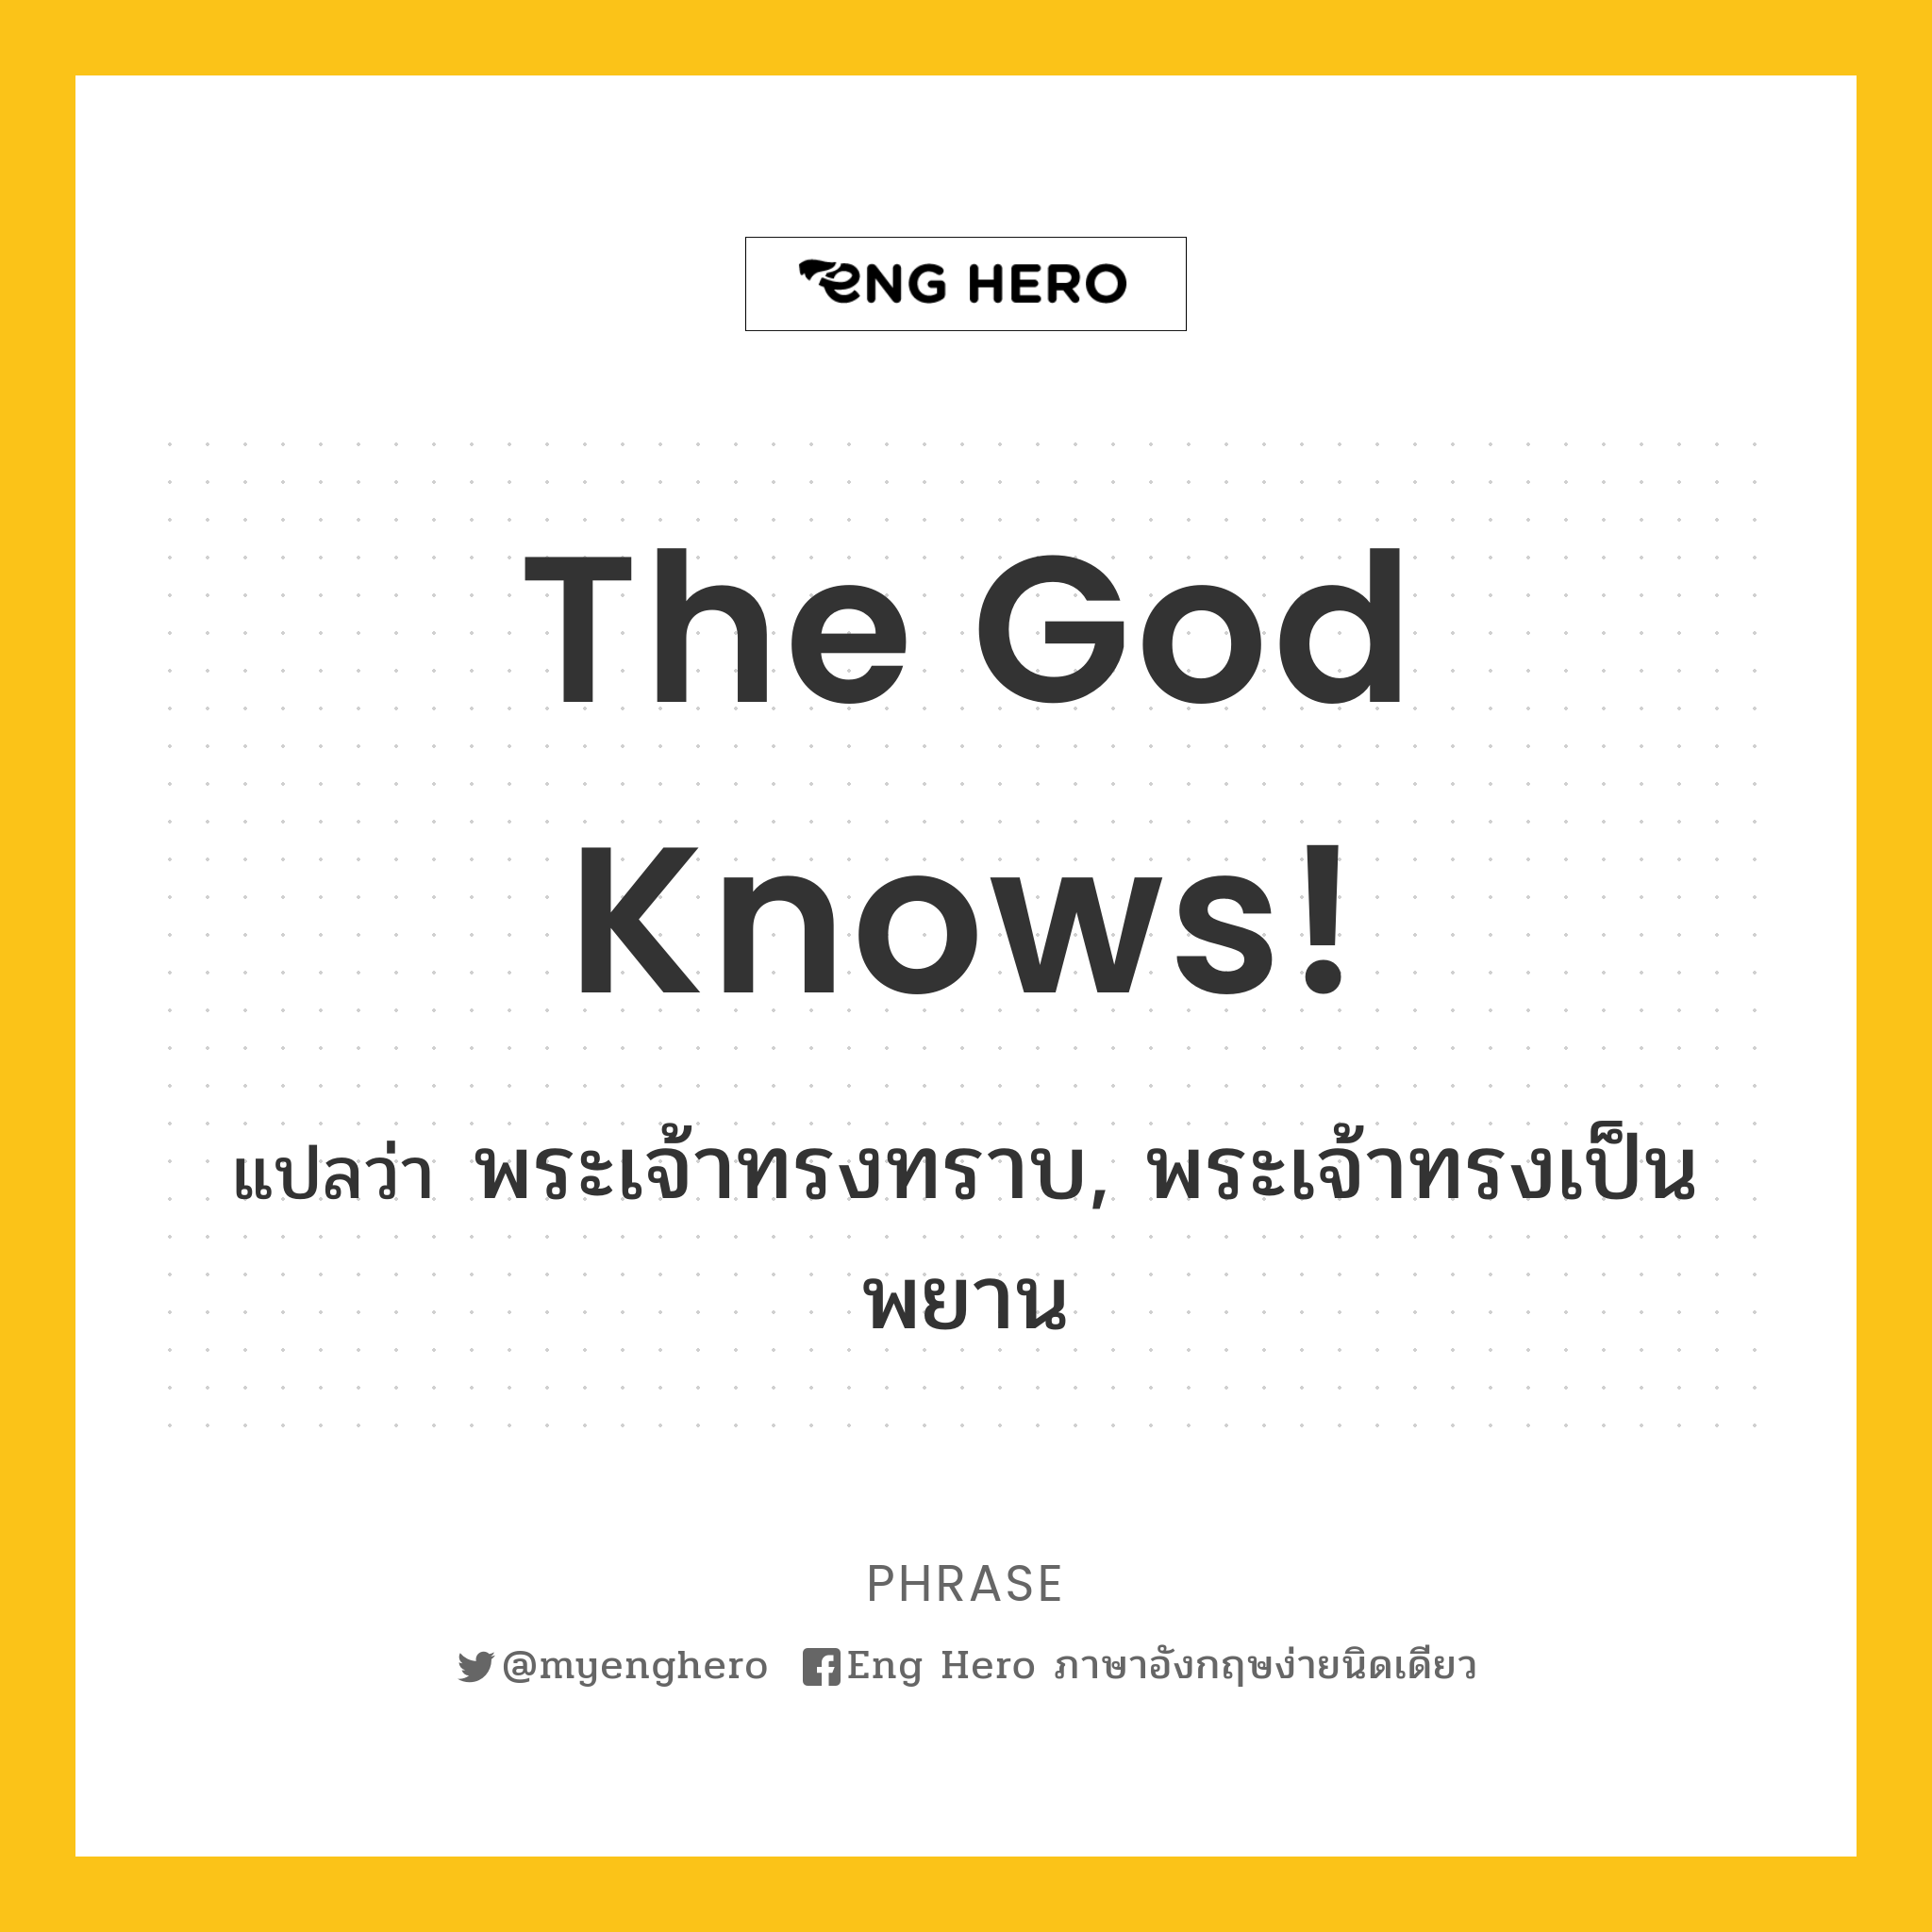 The God knows!